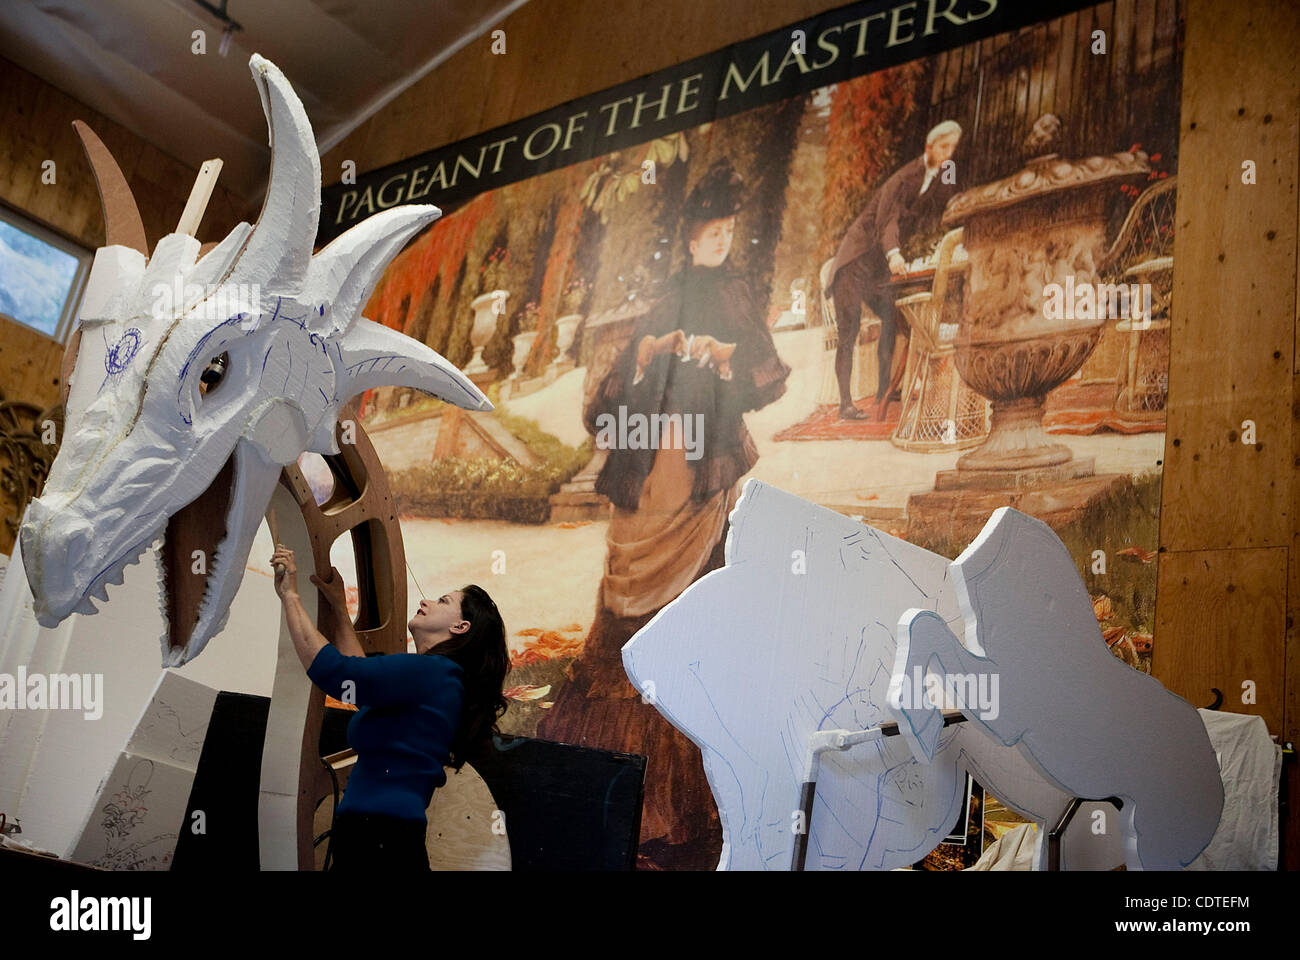 Jean Ashton cuts and shapes a large styrofoam dragon head in the Pageant of  the Masters workshop that will be used in live performances during this  year's event themed "Only Make Believe."